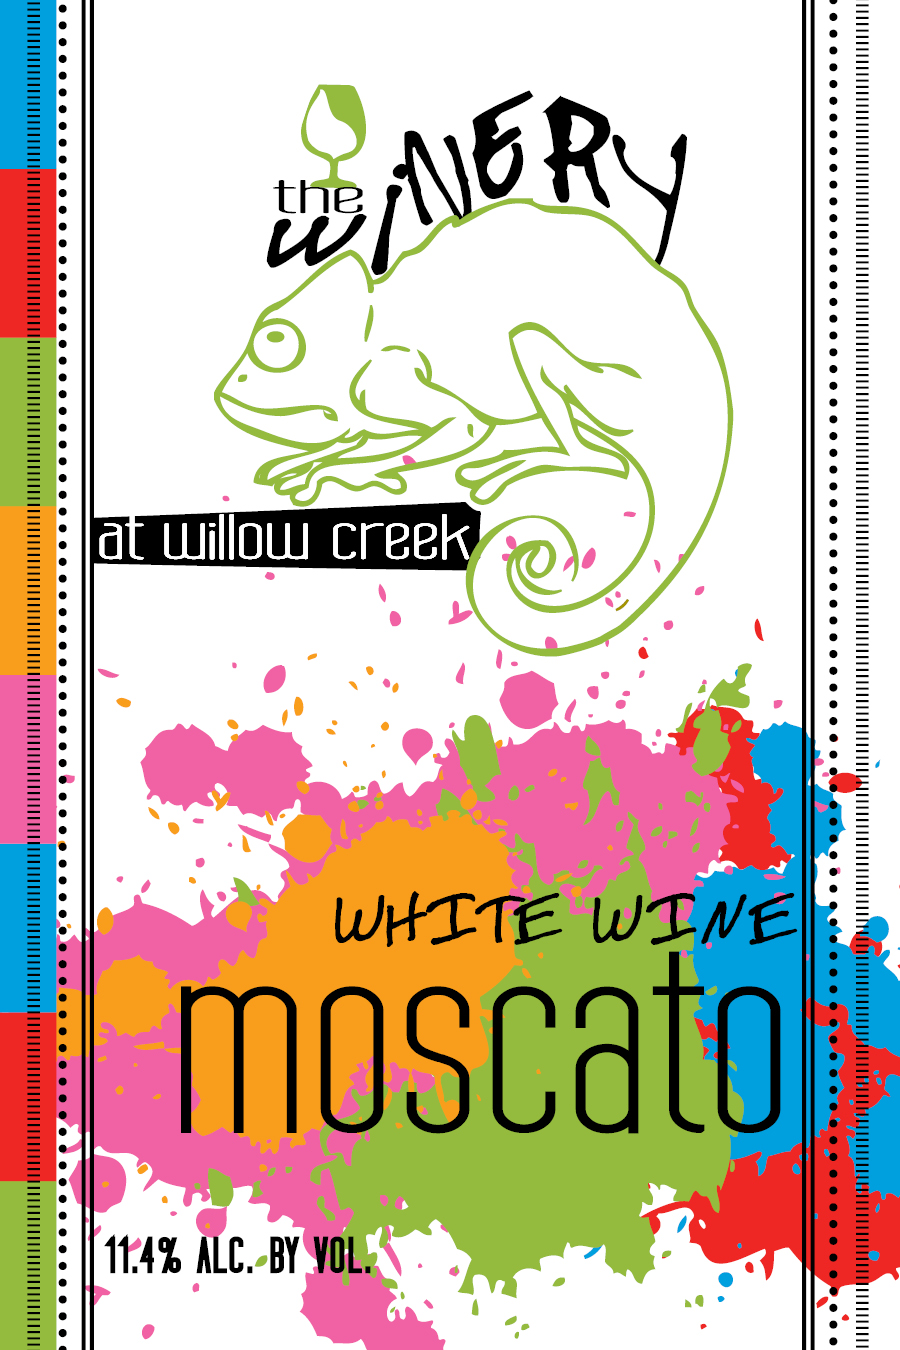 Product Image for Moscato